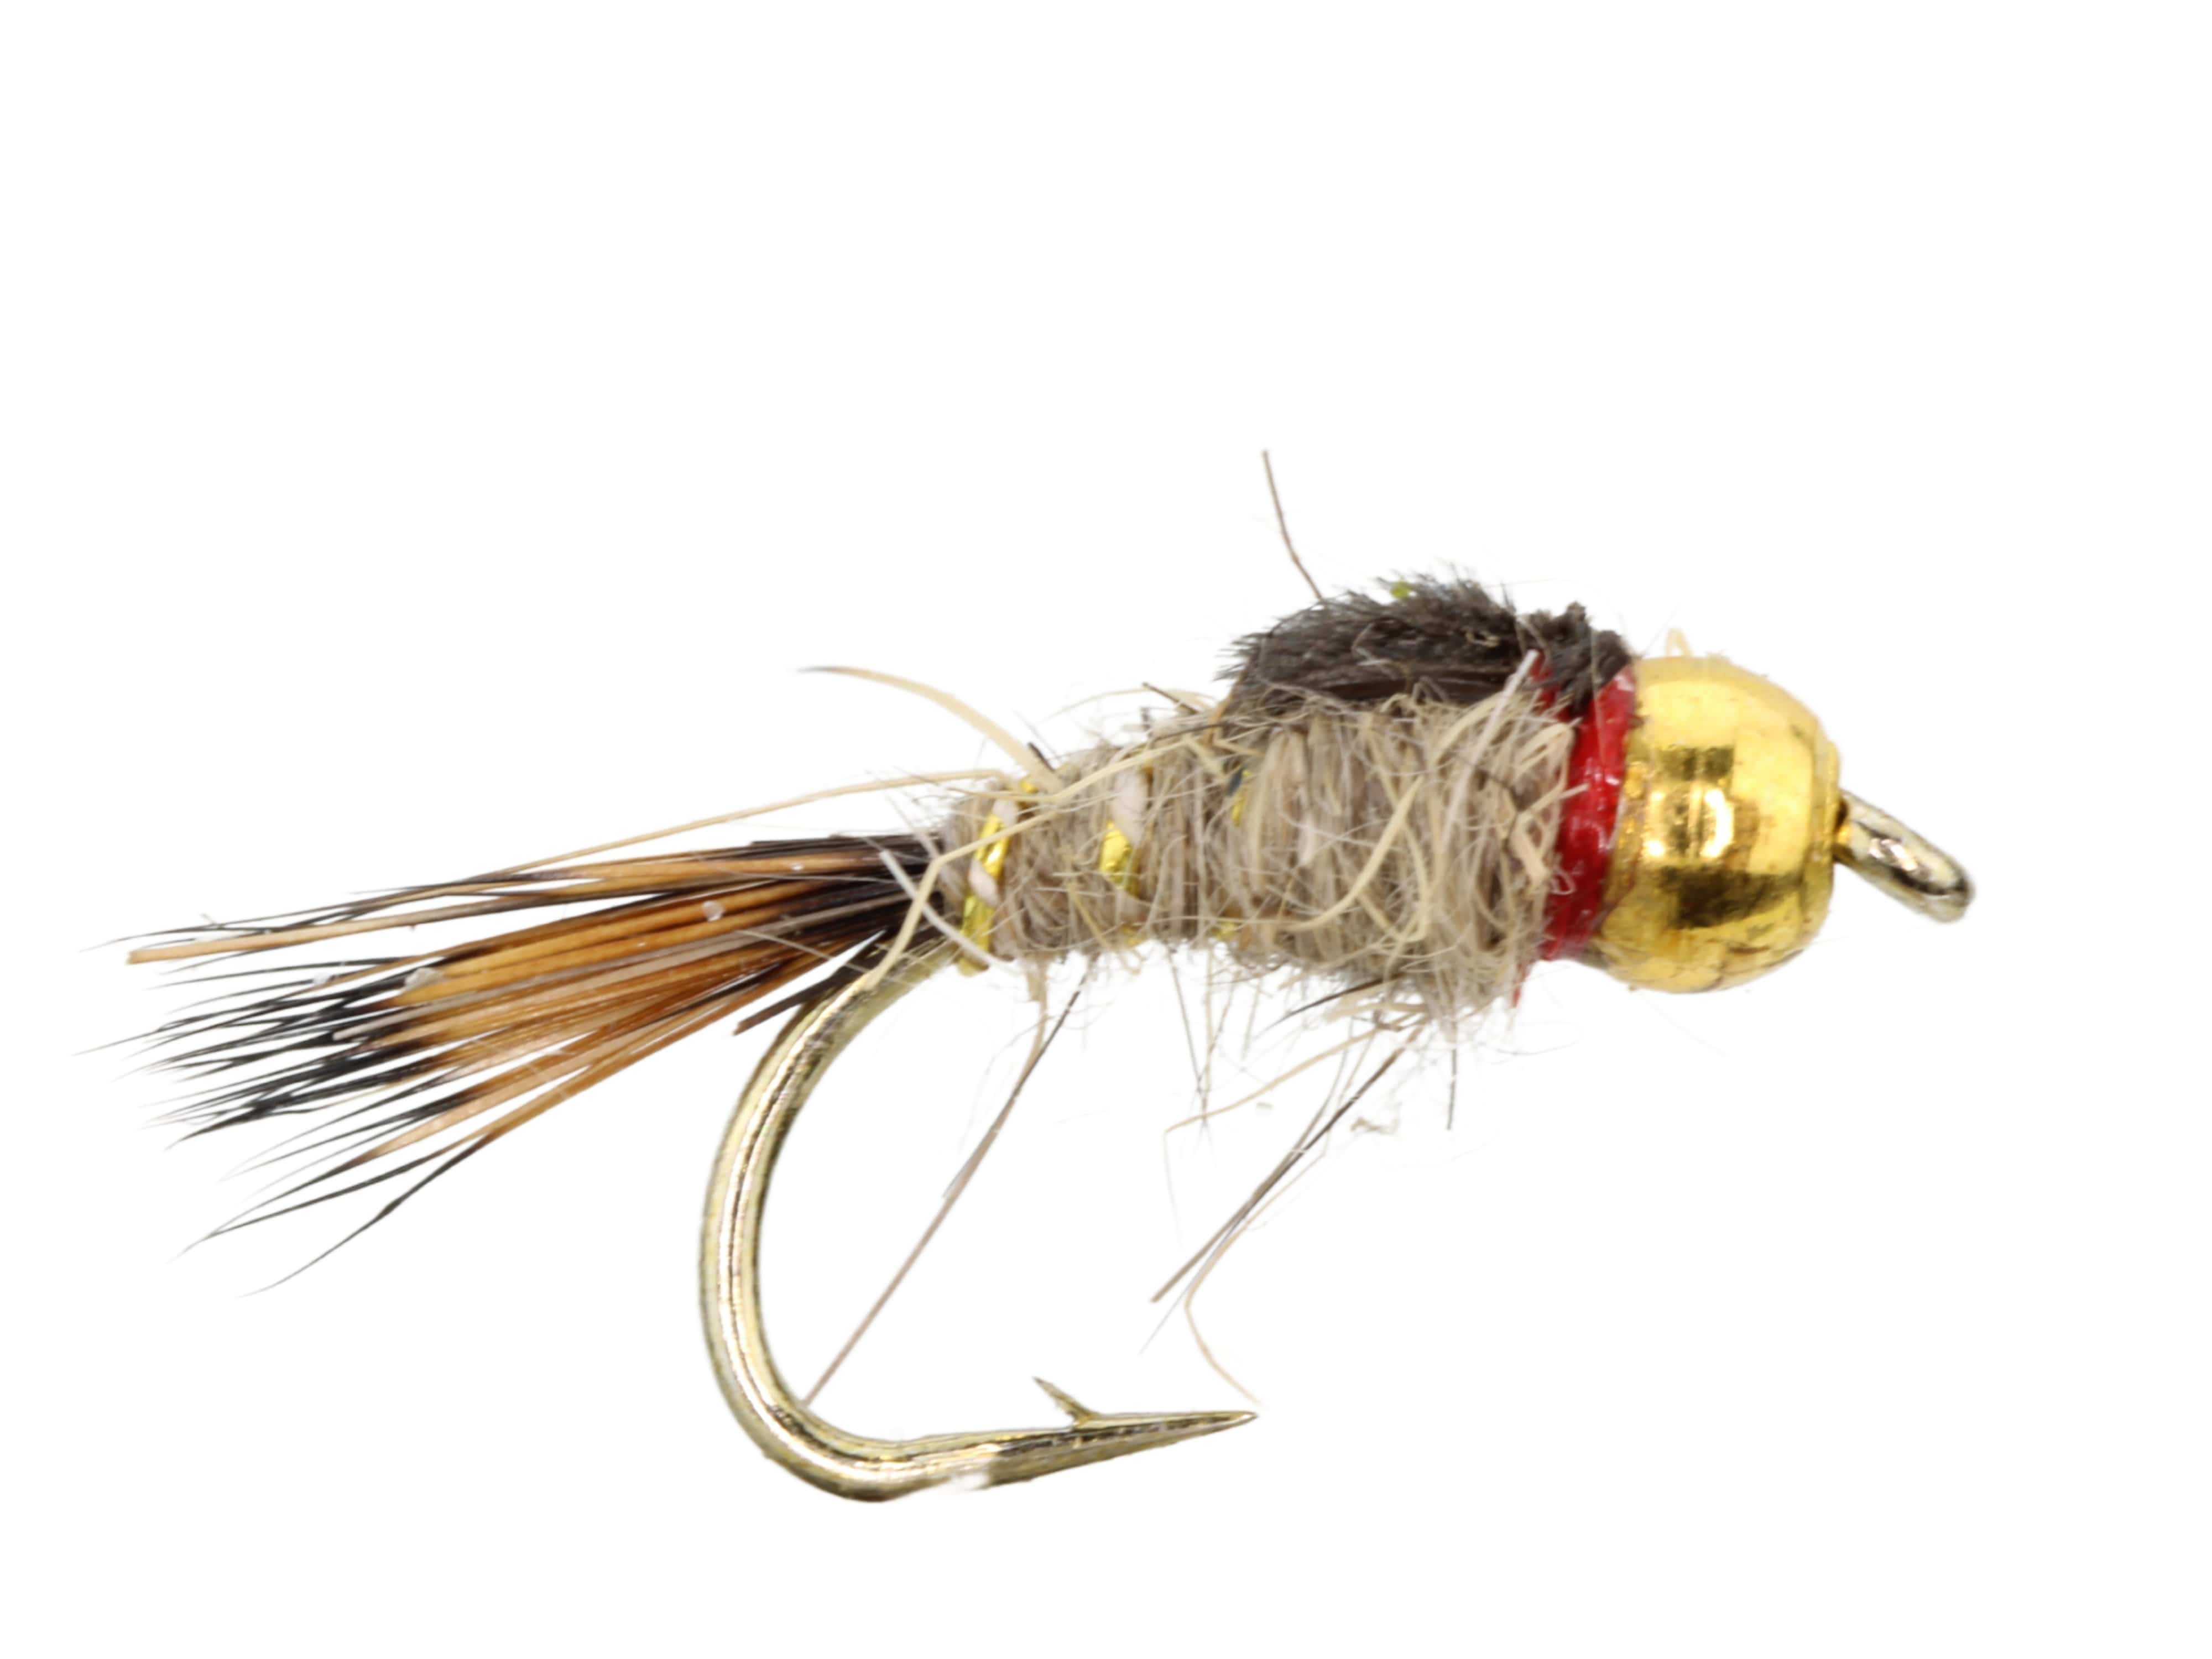 Wild Water Fly Fishing Gold Ribbed Hare's Ear Bead Head Nymph, Size 14, Qty. 6